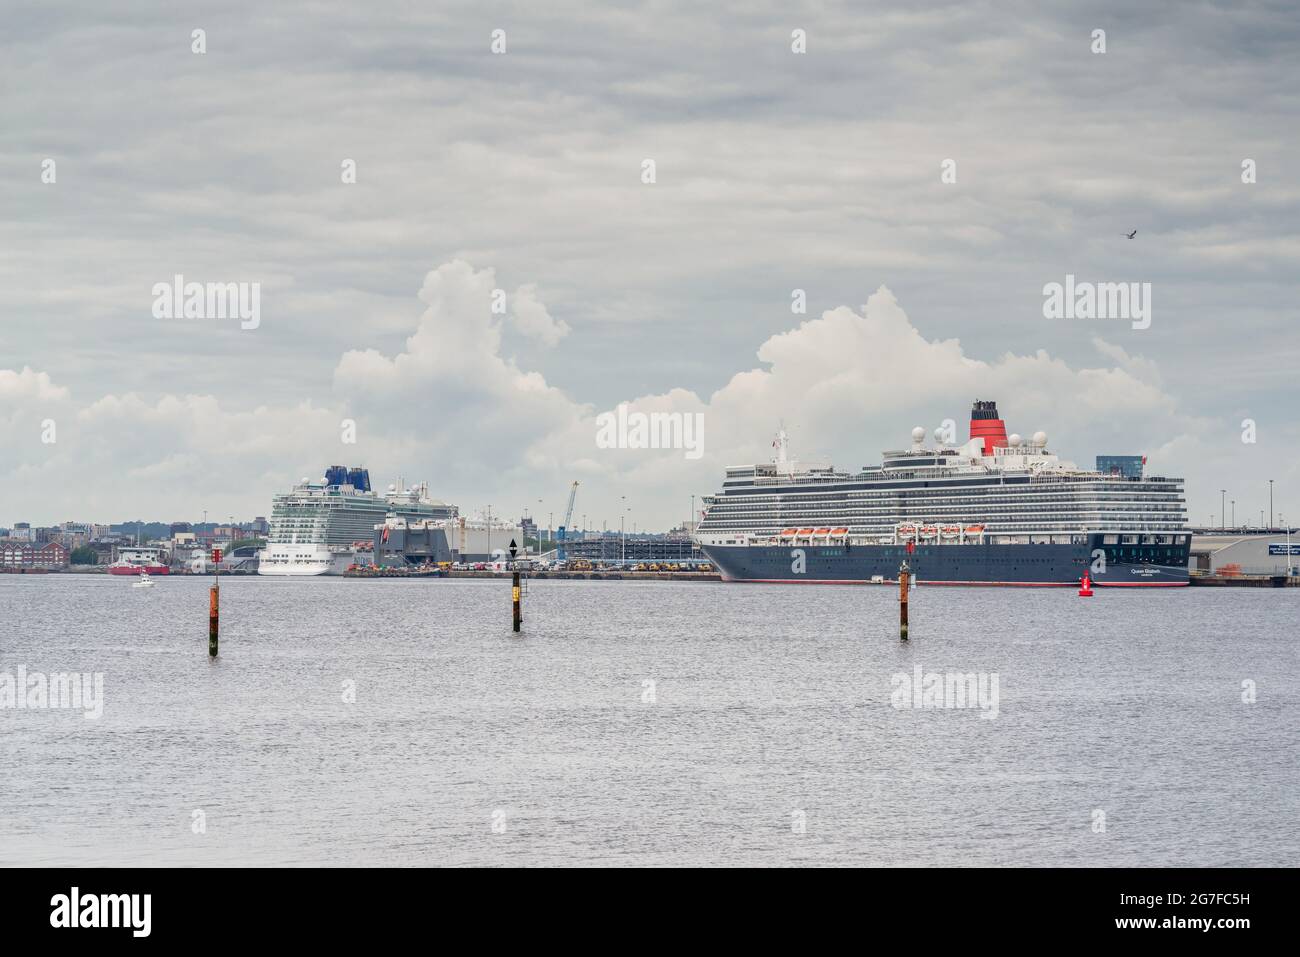 The Cunard Queen Elizabeth and Britannia cruise ships docked in the Port of Southampton, seen from Hythe marina, Southampton, England, UK Stock Photo